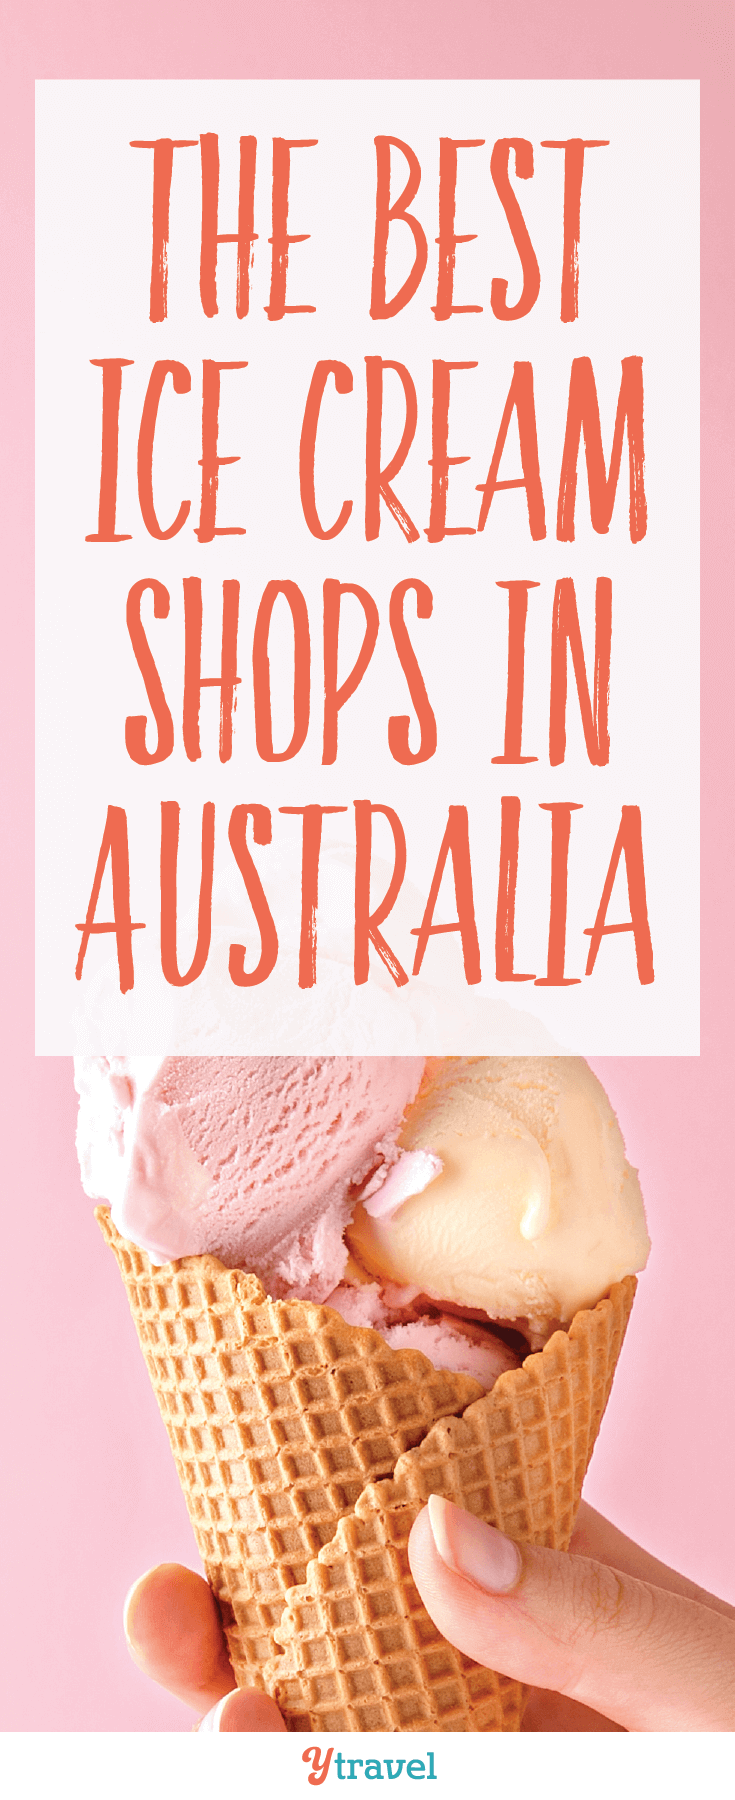 On the hunt for the best ice cream shops in Australia? Look no further!